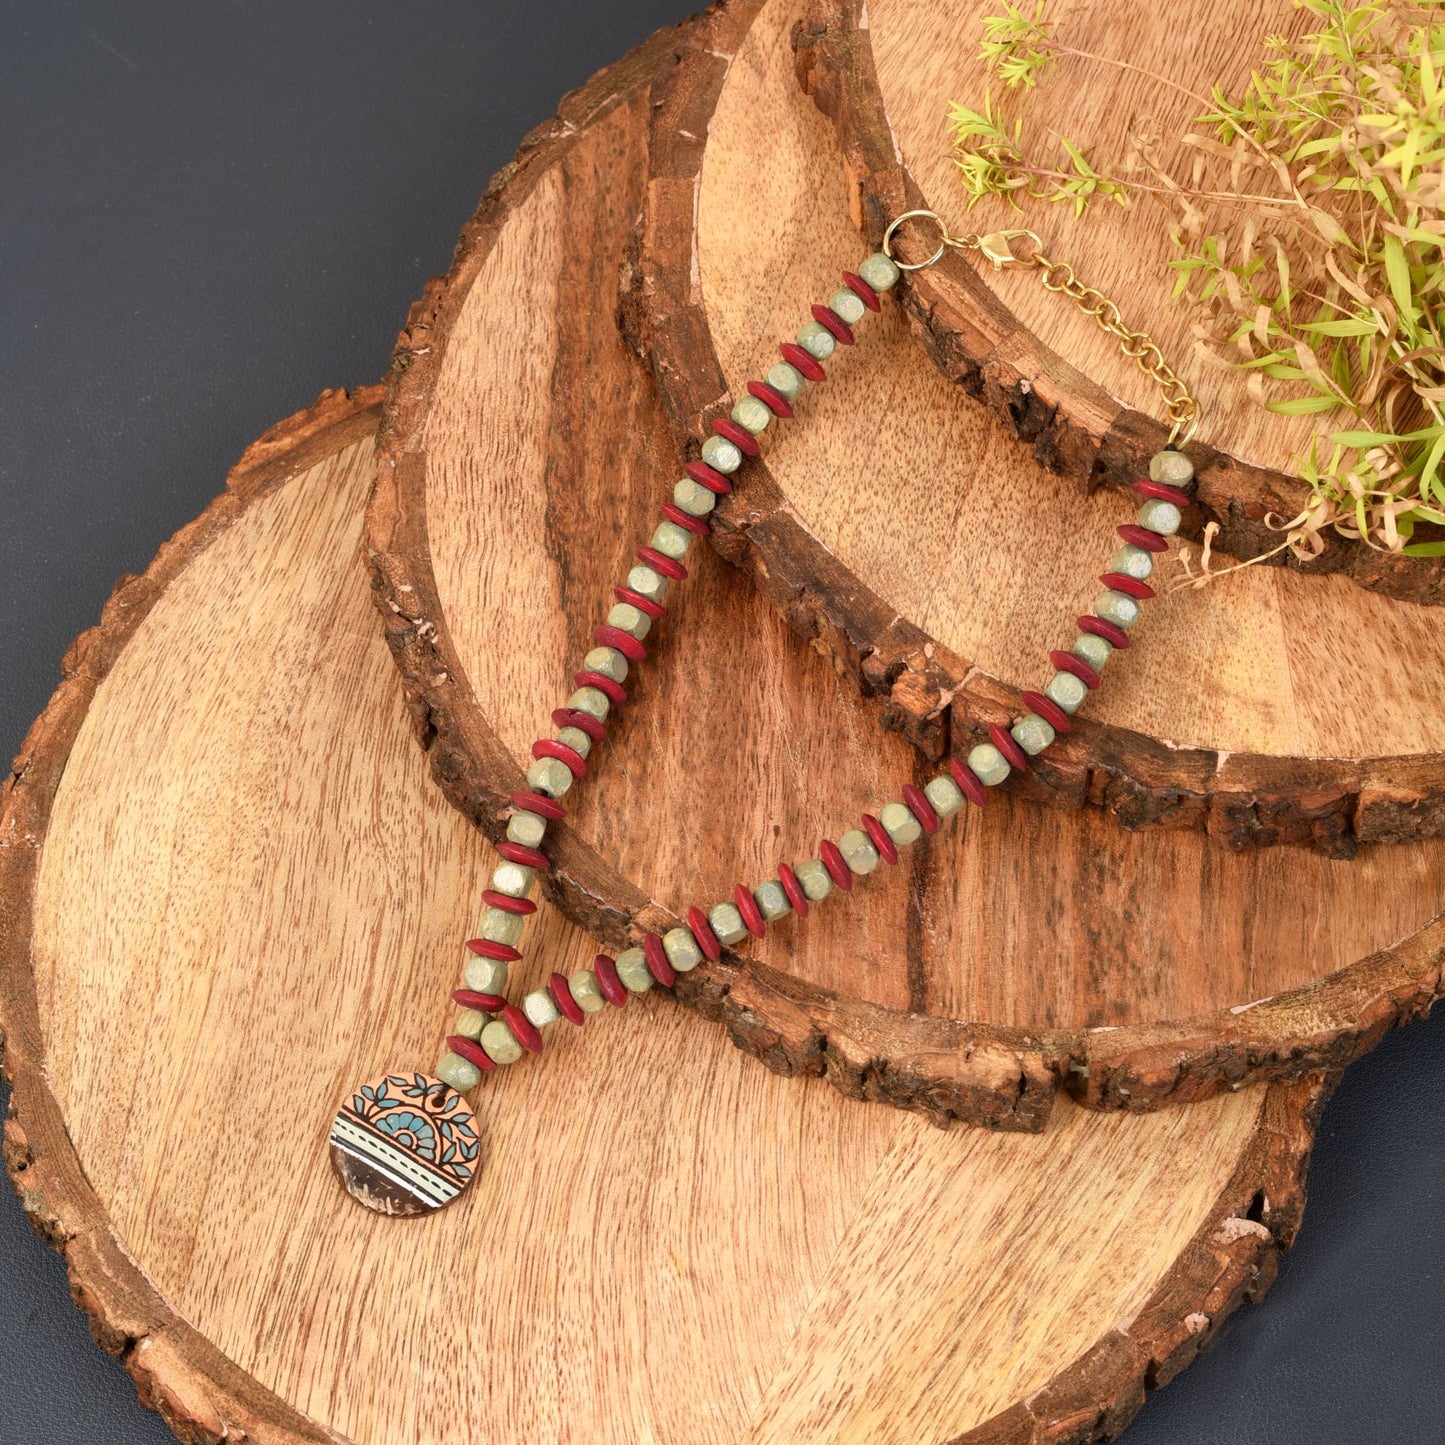 The Queen Handcrafted Tribal Necklace